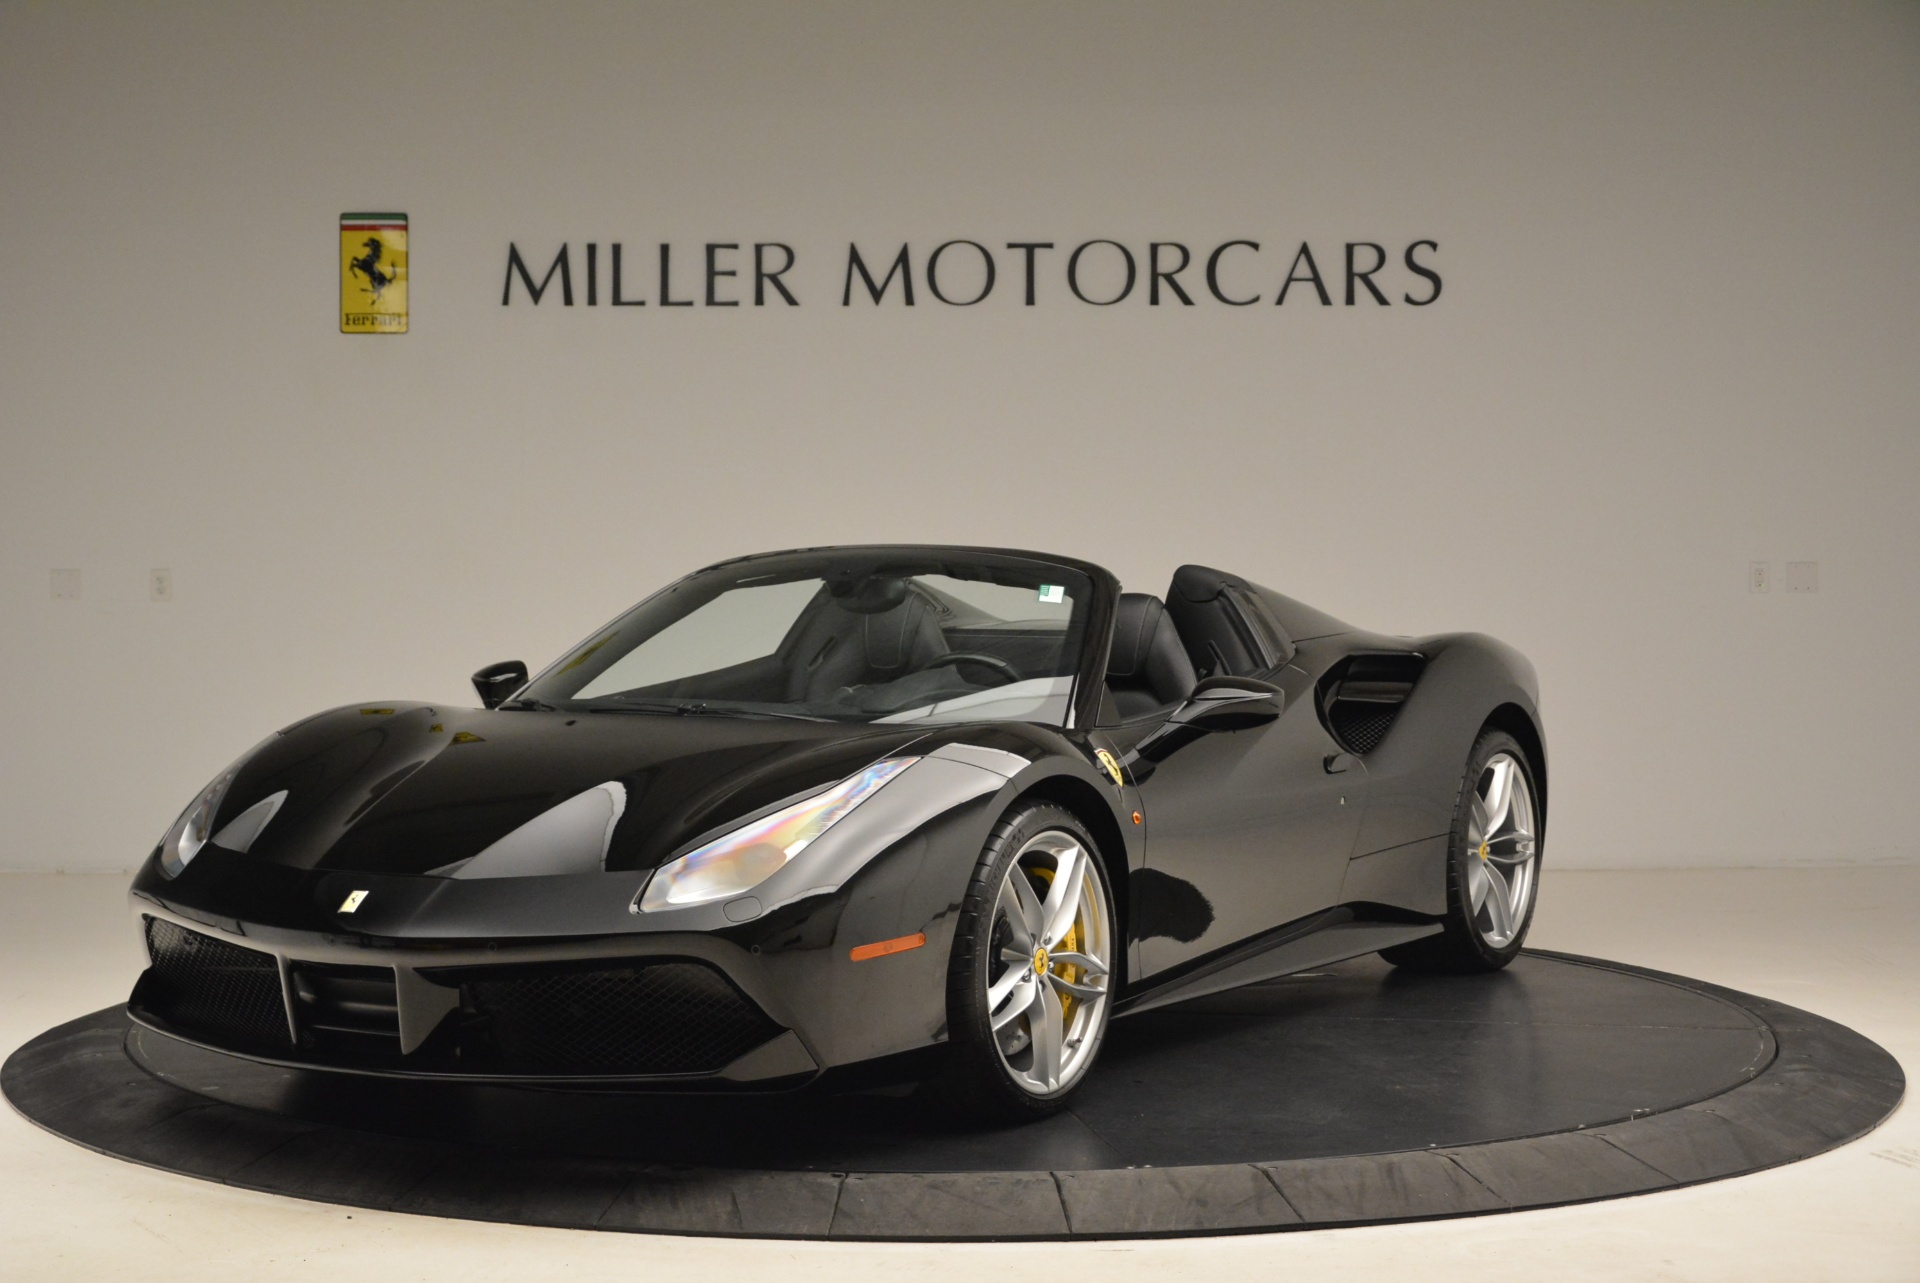 Used 2016 Ferrari 488 Spider for sale Sold at Bentley Greenwich in Greenwich CT 06830 1